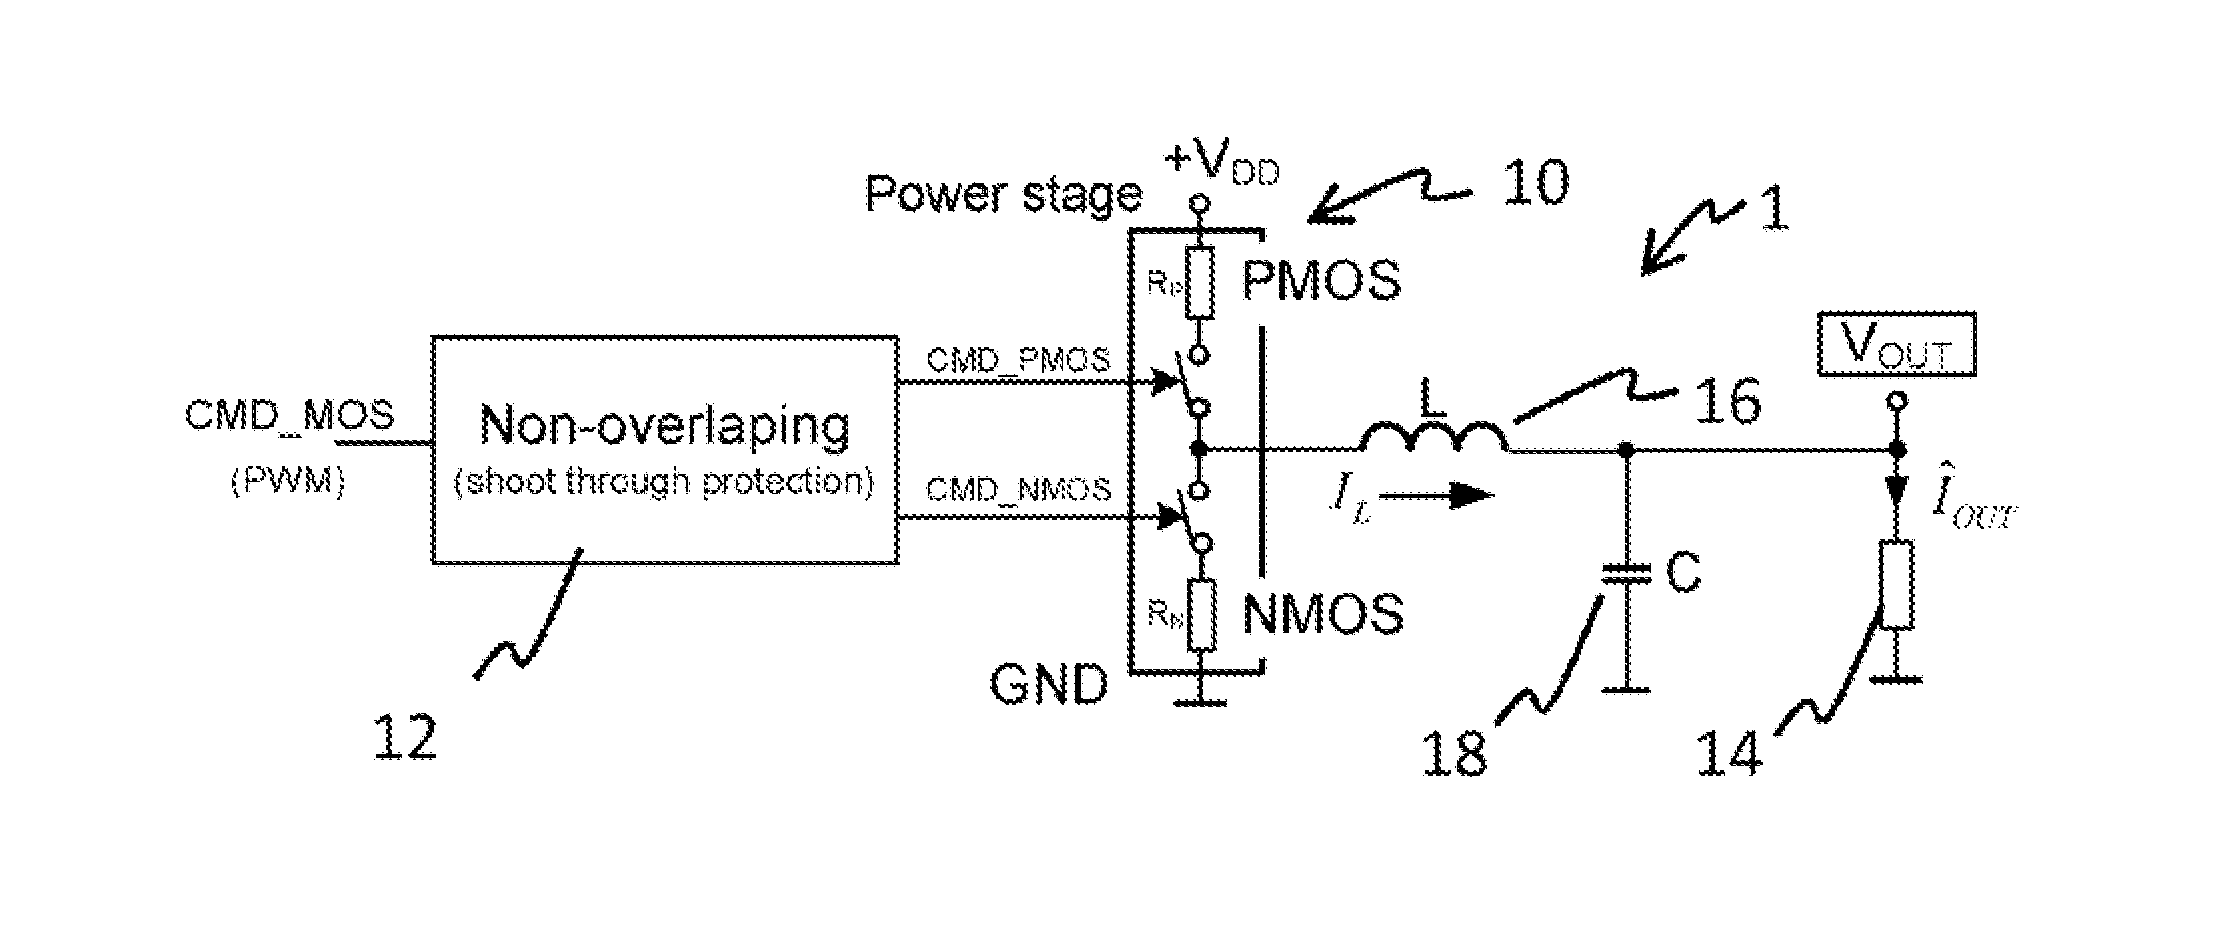 Absolute value current-sensing circuit for step-down dc-to-dc converters with integrated power stage